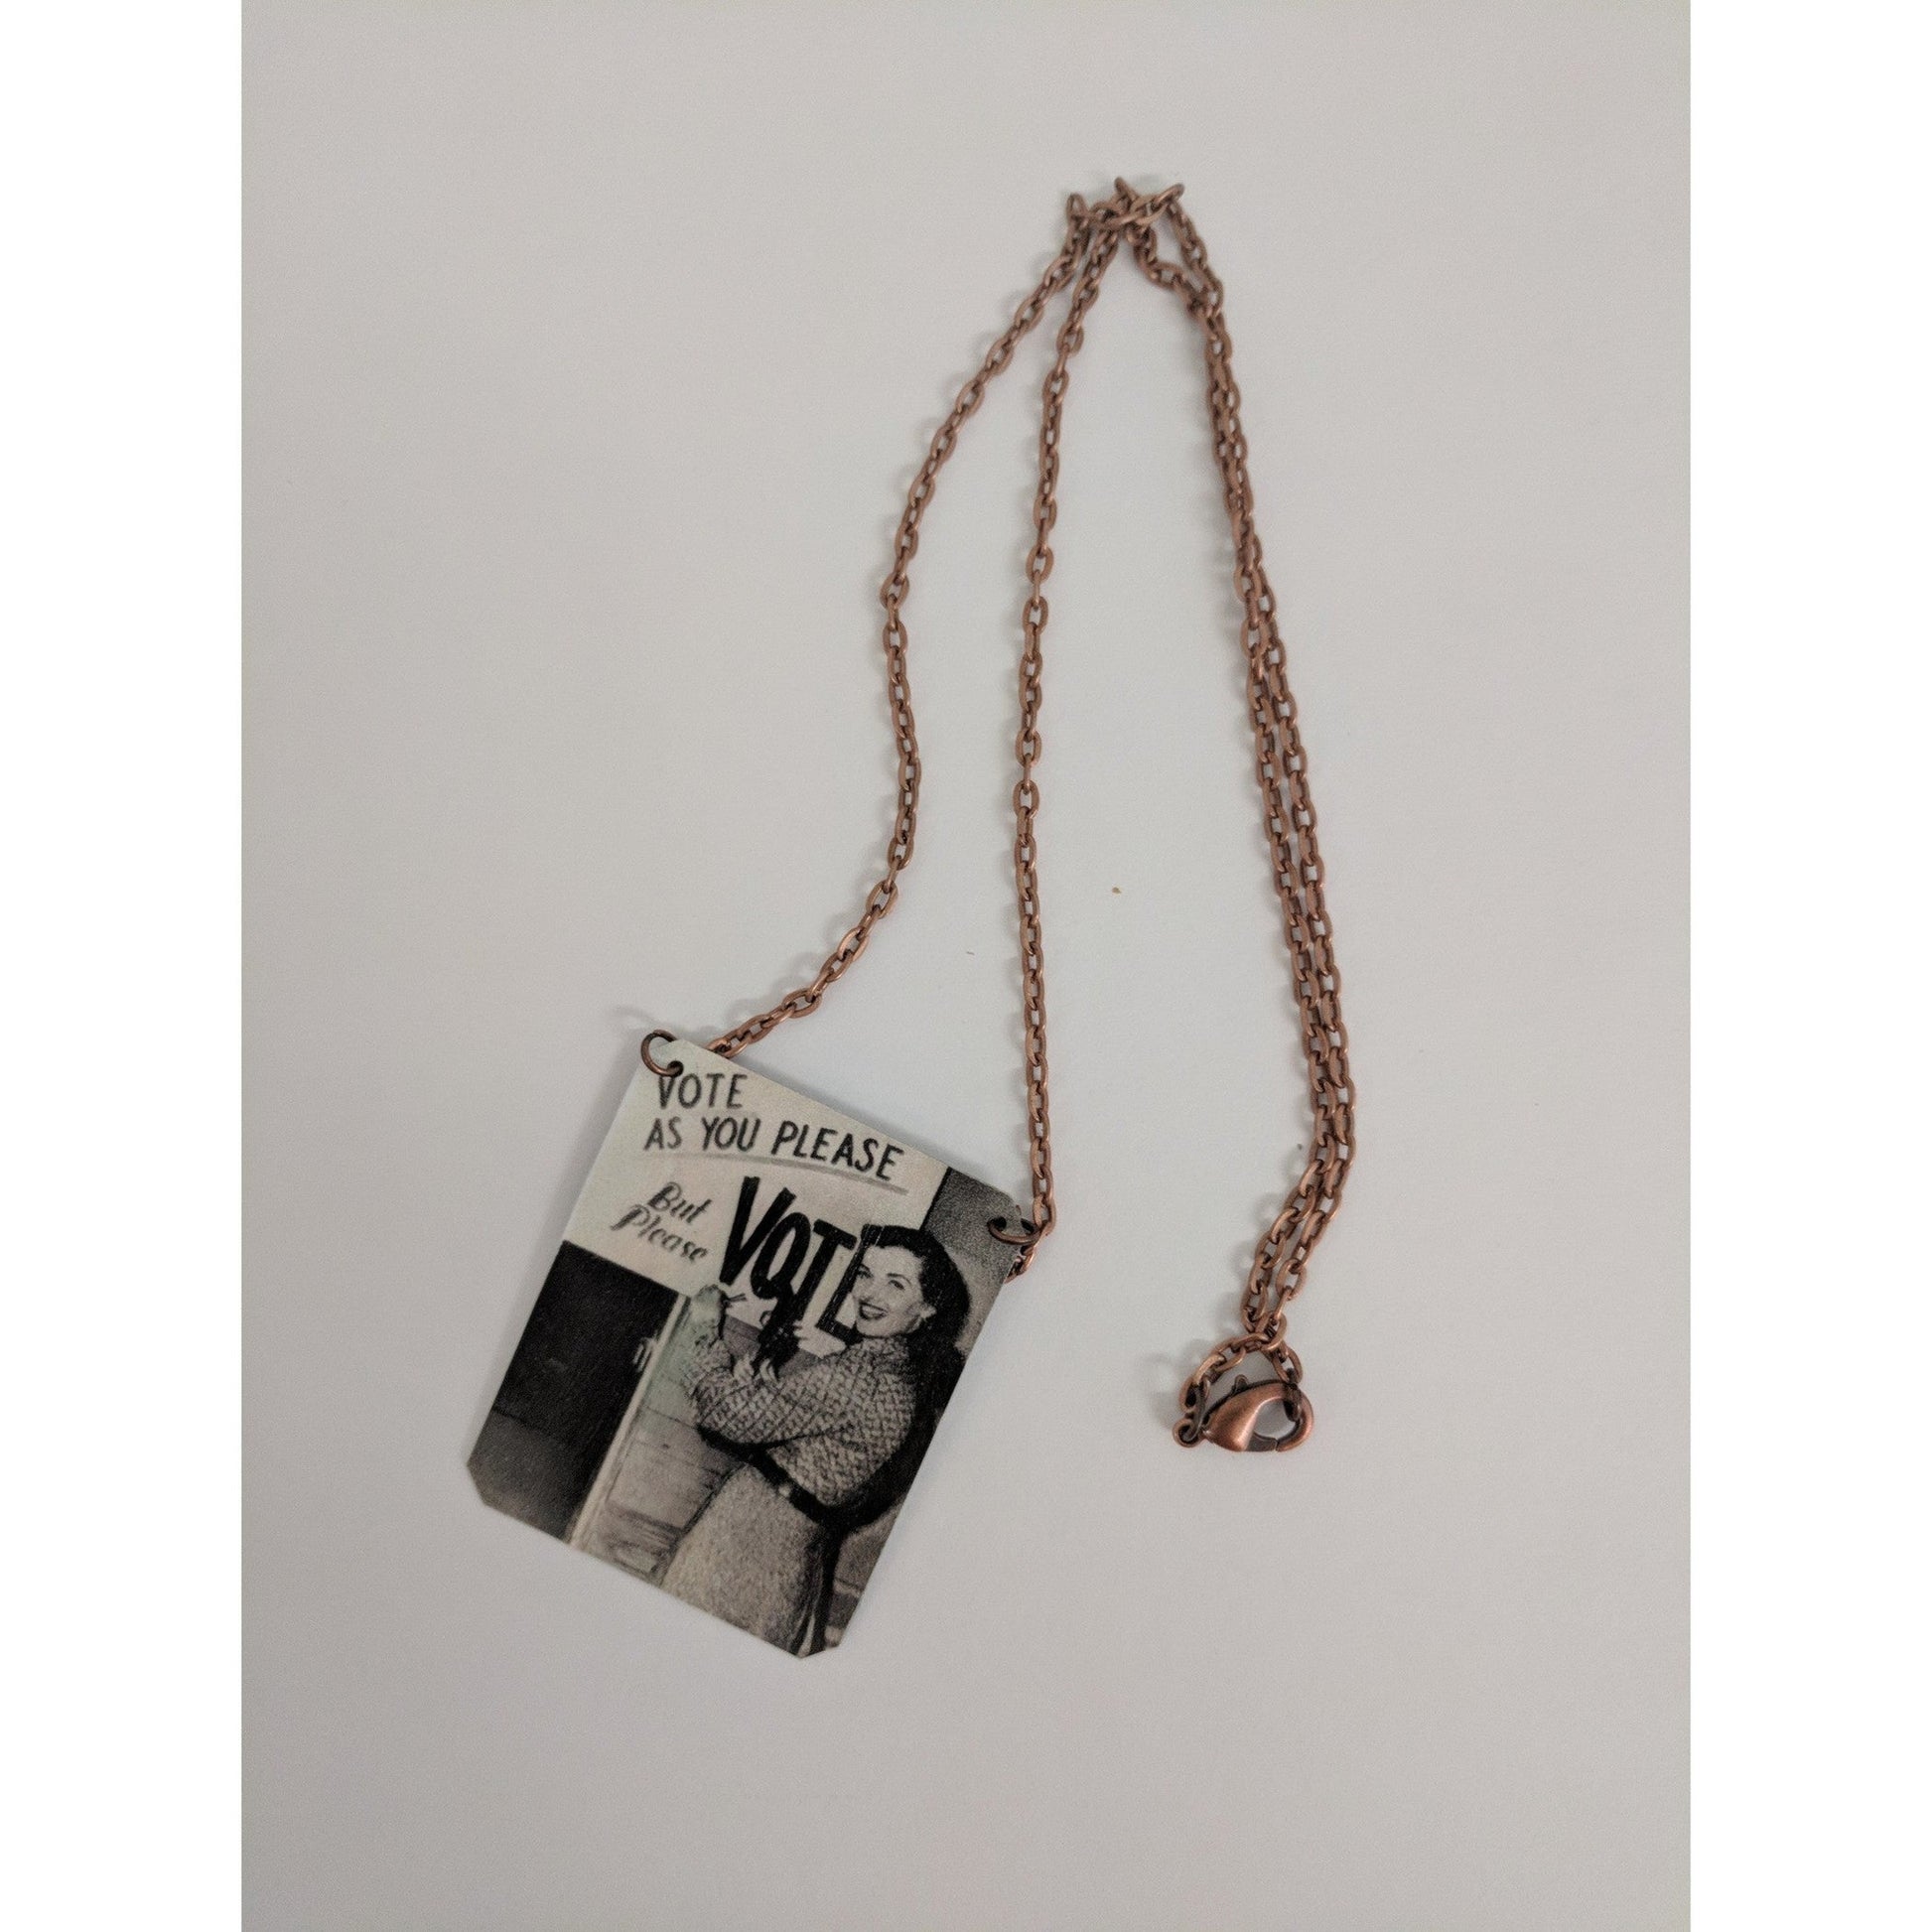 Vote As You Please But Please Vote Handmade Women's Suffrage Necklace